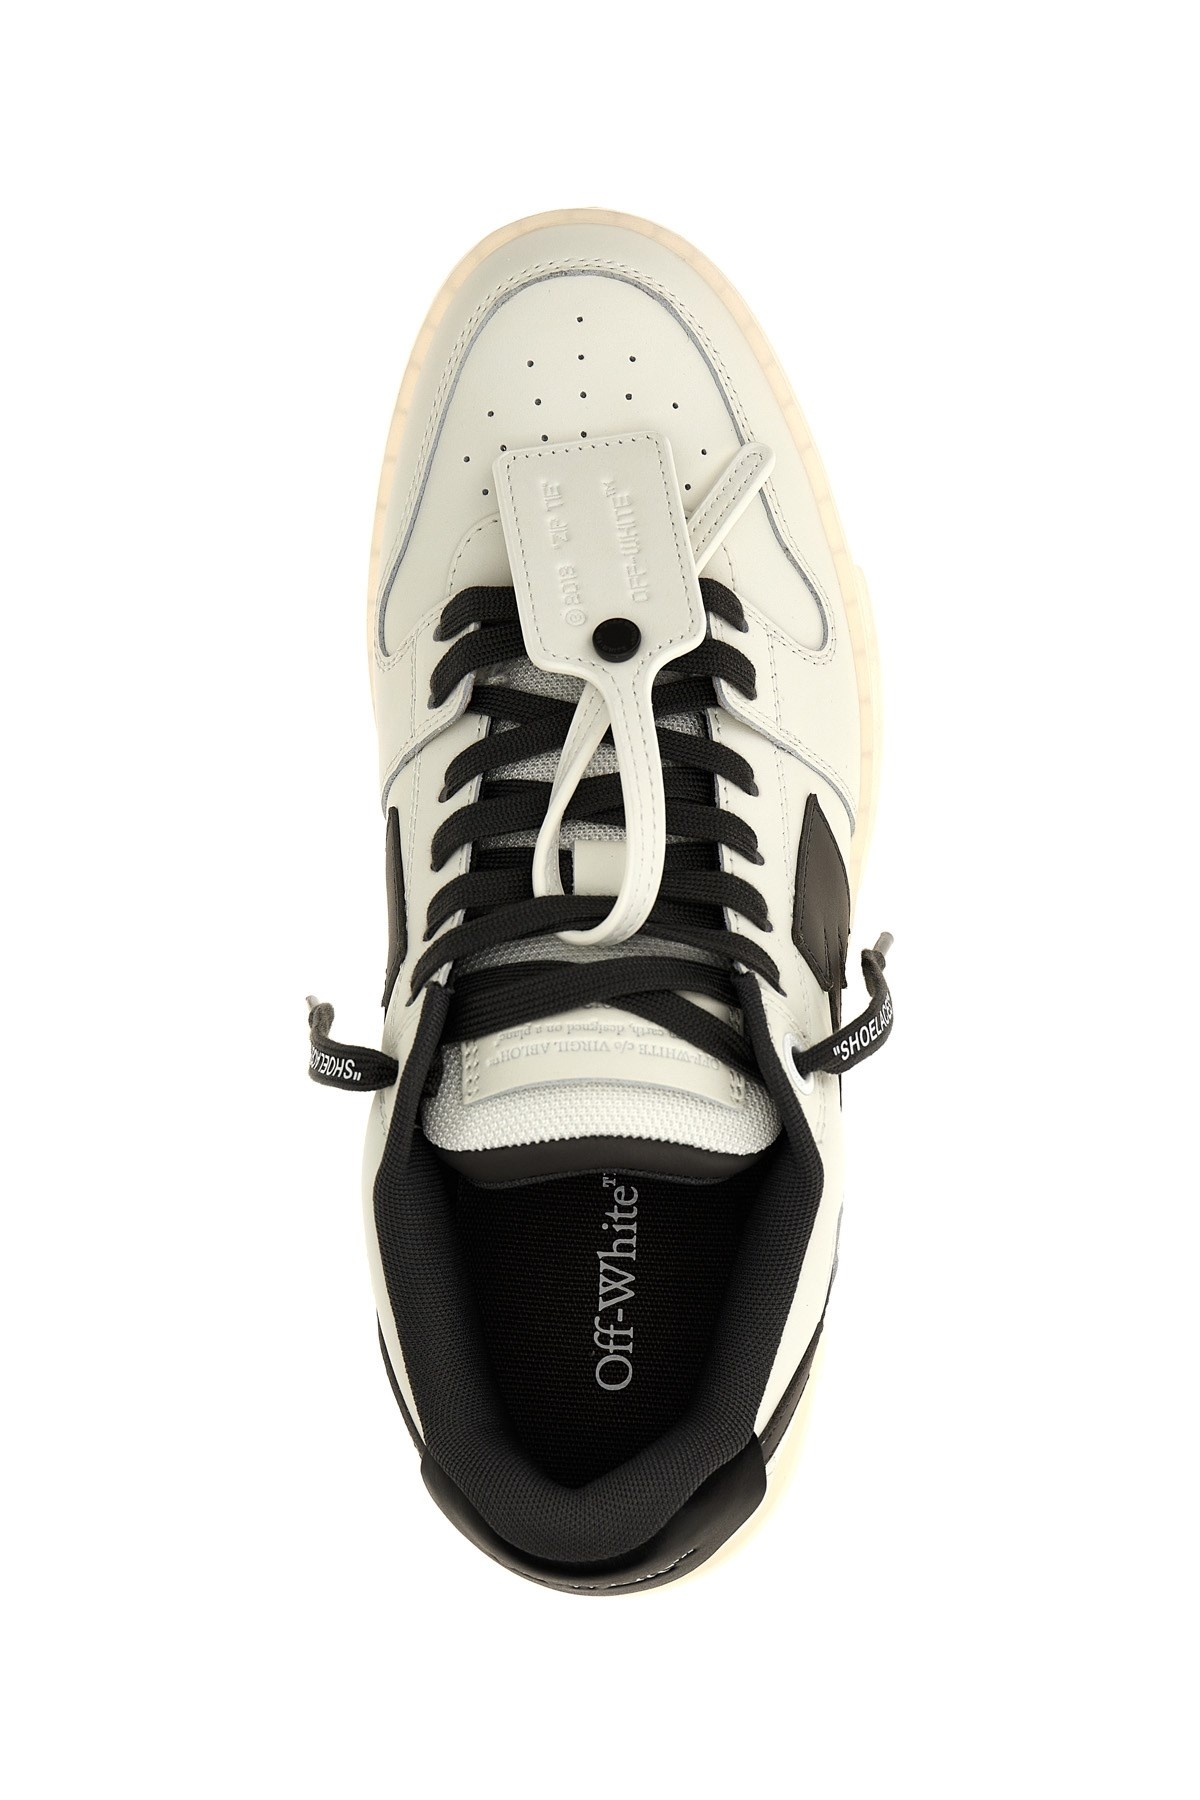 'Out of office' sneakers - 5